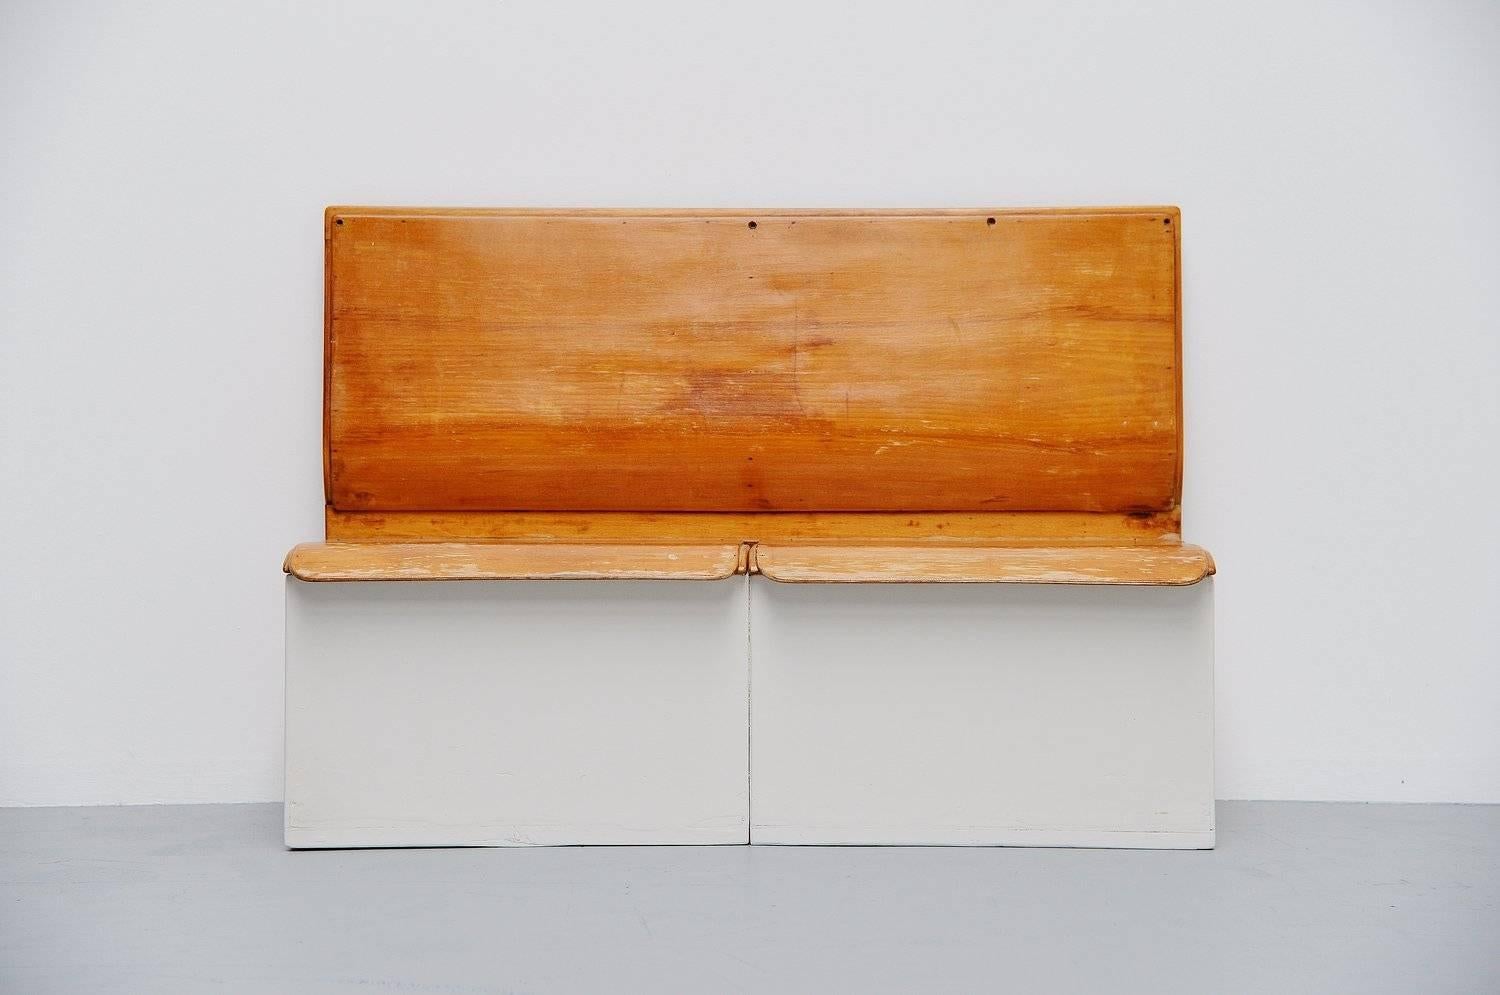 Fantastic rare laundry bench designed by Piet Zwart for Bruynzeel, Holland 1950. This bench was probably part from a kitchen/laundry unit designed by Piet Zwart in the 1950s. The bench has 2 folding seats where you could put laundry in. The inside